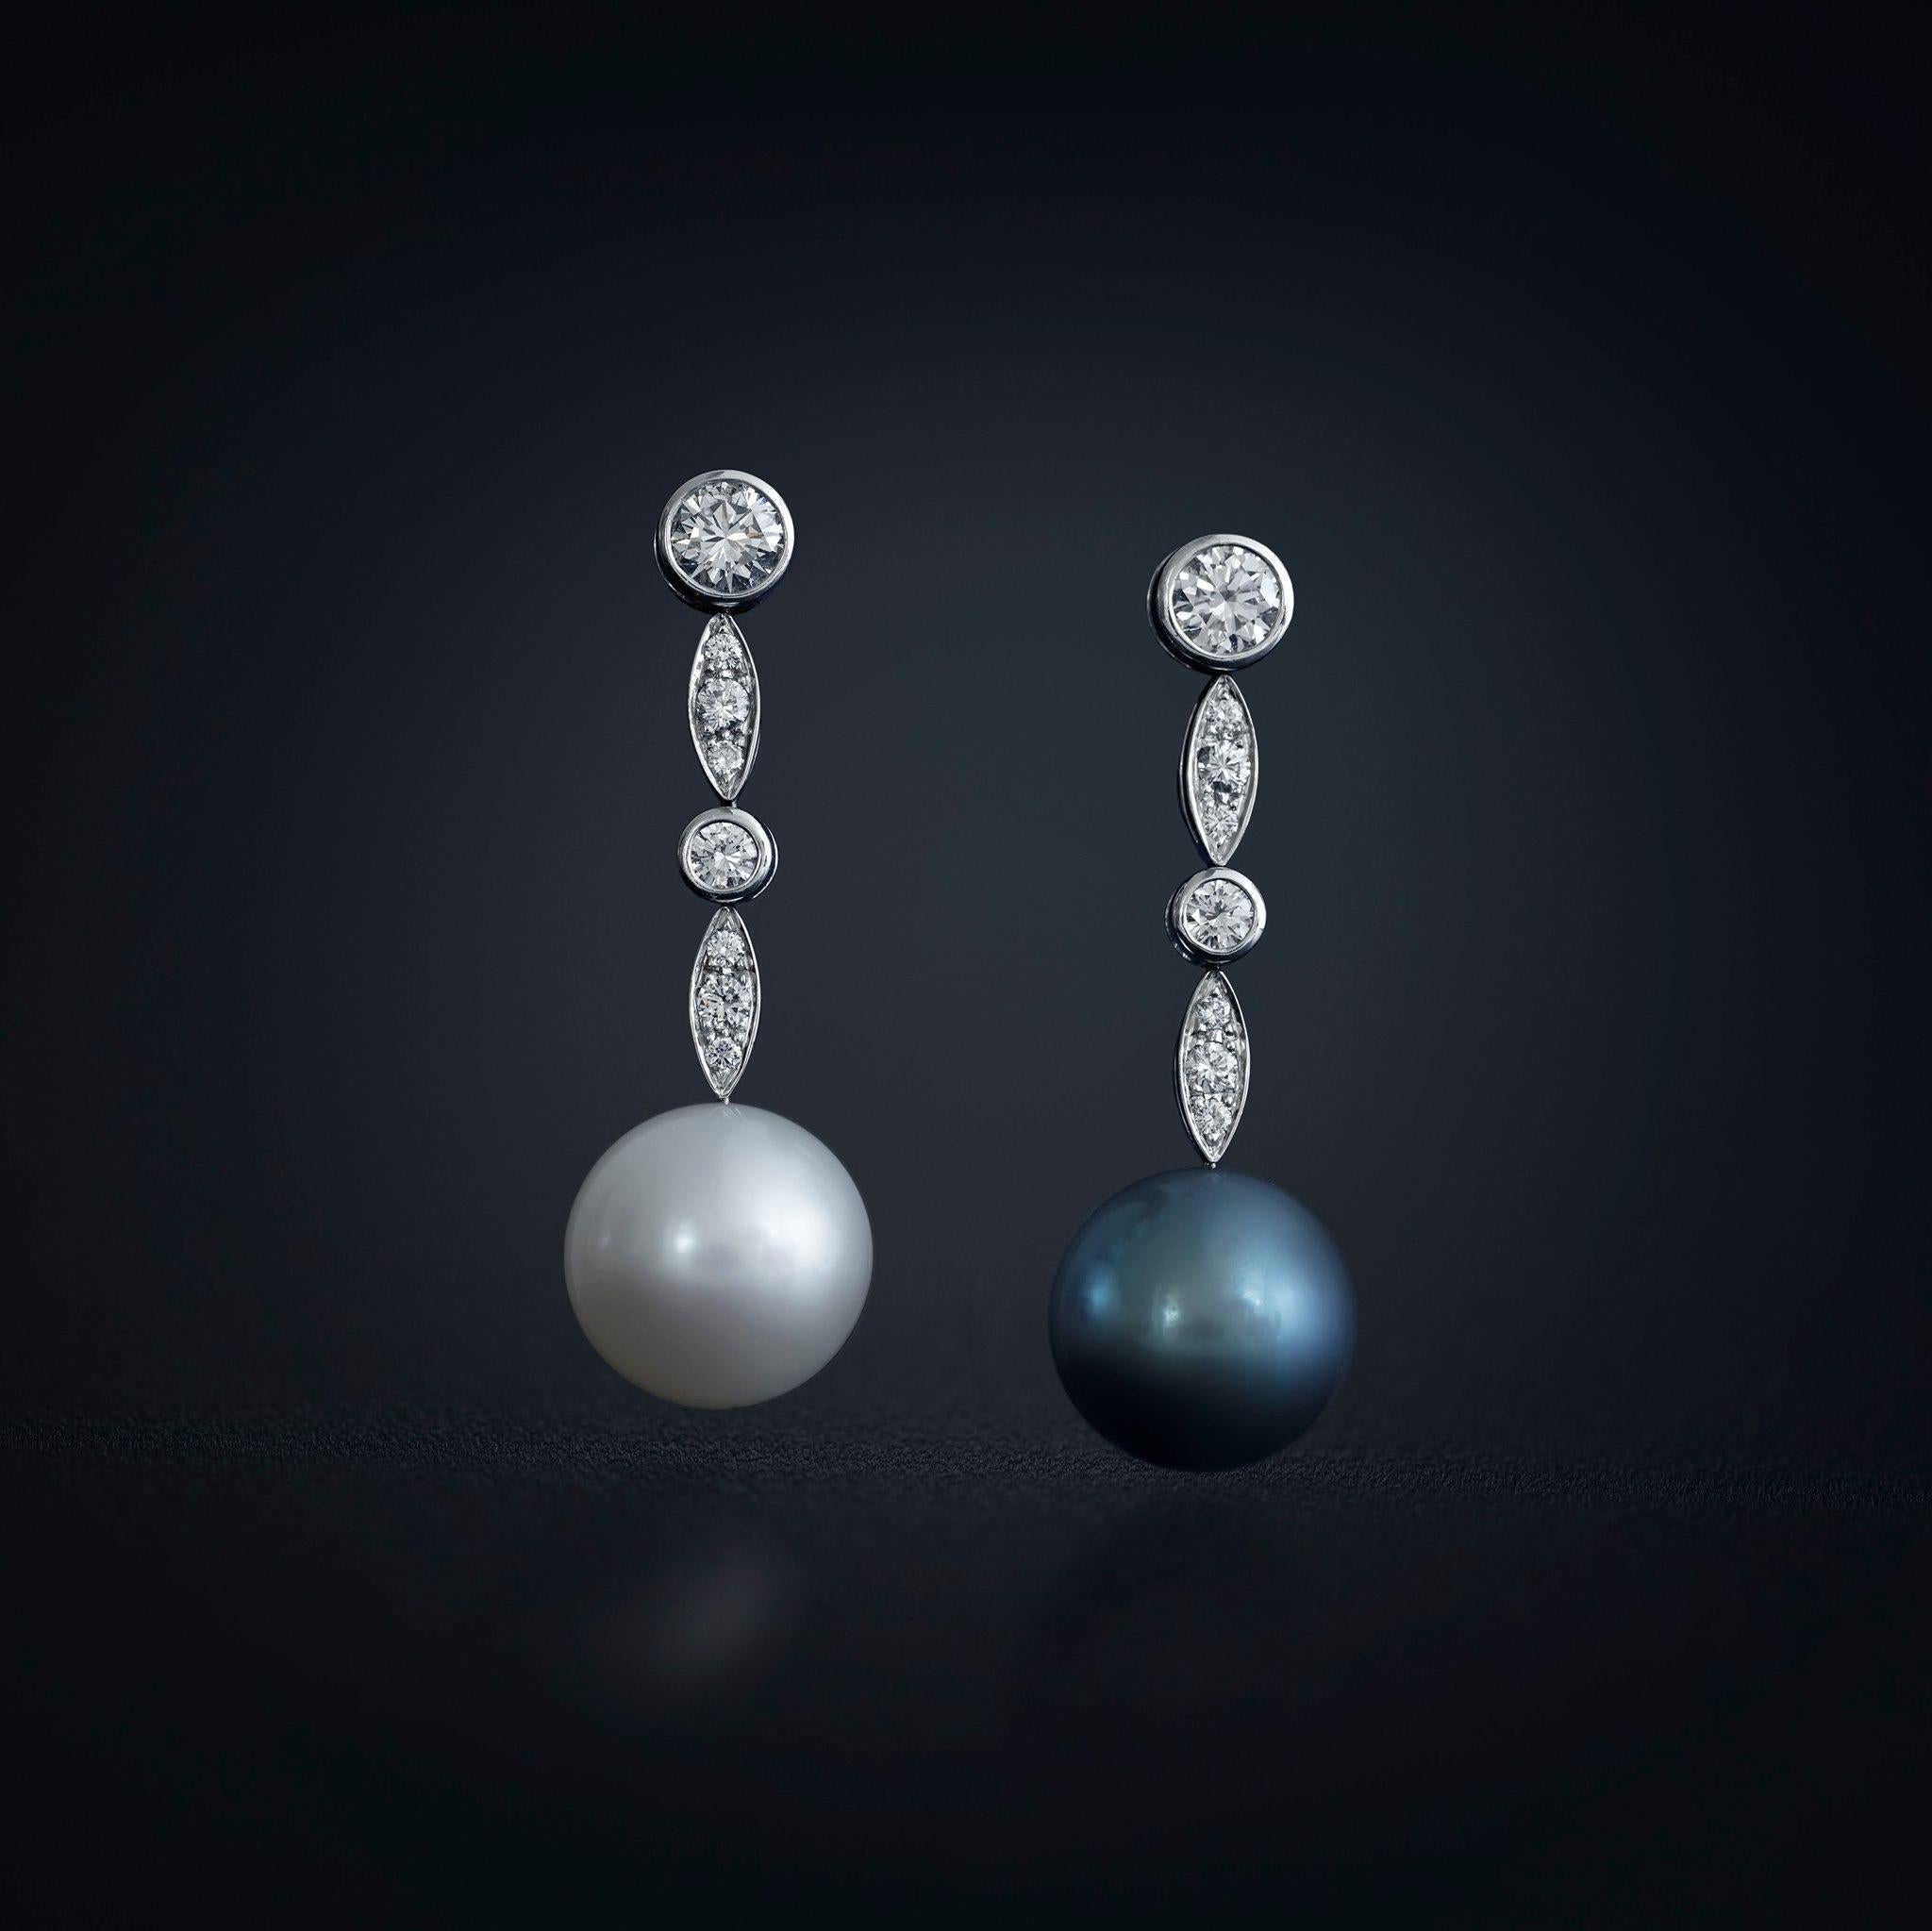 Impressive pair of a white South Sea and a dark grey Tahitian Cultured Pearl. With spectacular 15mm in size, perfectly round, a very high luster and a clean surface this pair can be considered as rare. The earrings are in four point's movable, which